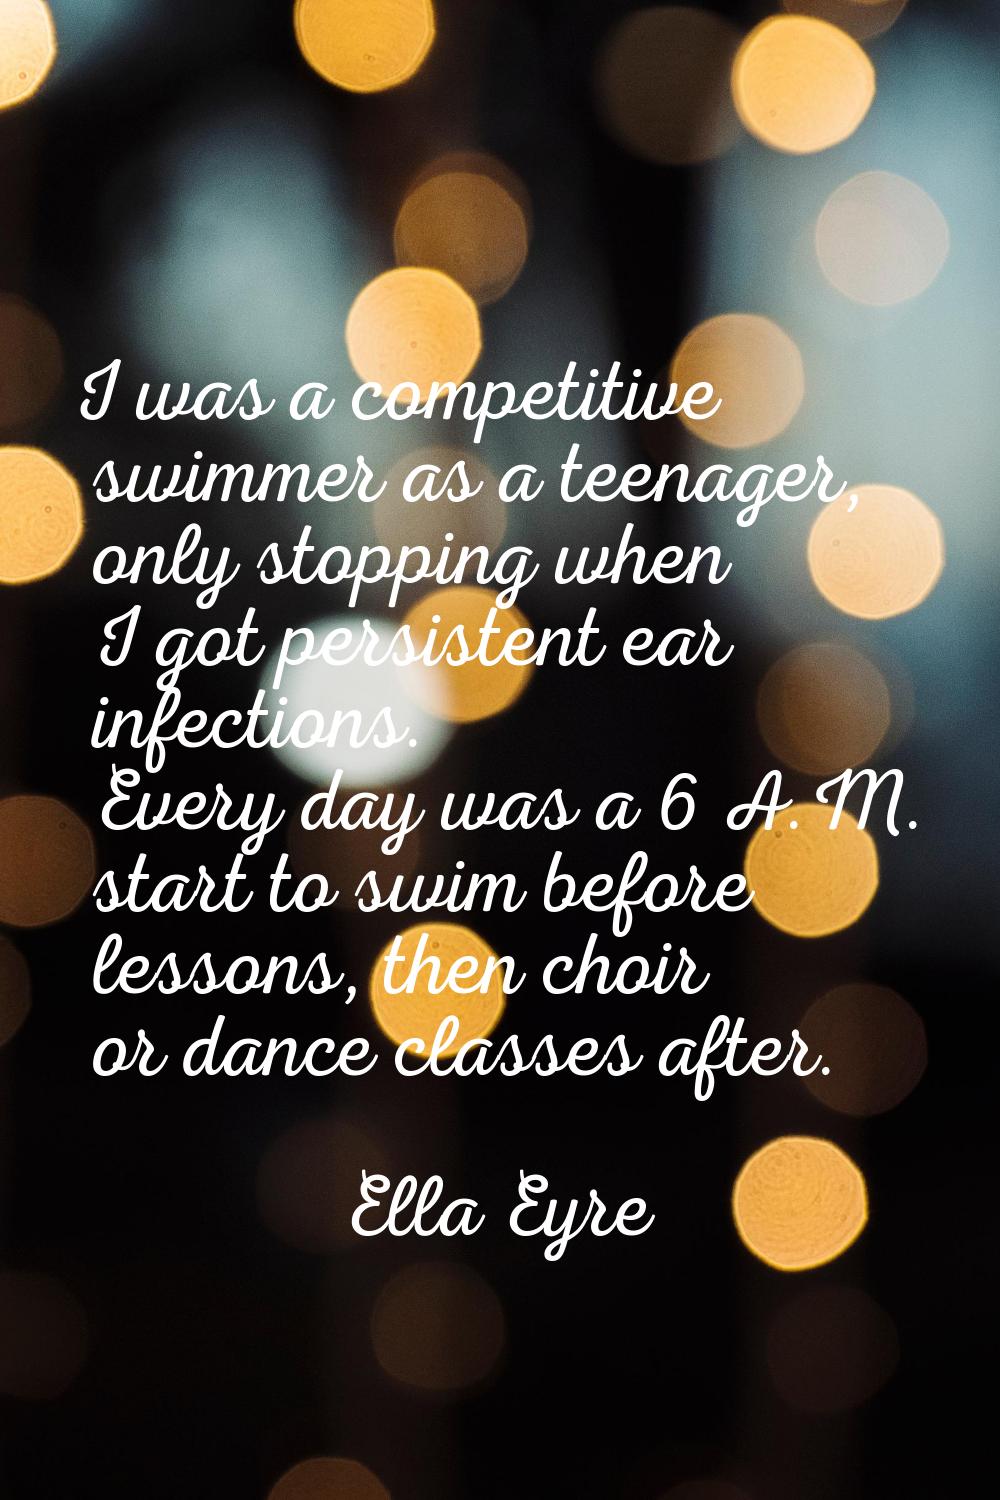 I was a competitive swimmer as a teenager, only stopping when I got persistent ear infections. Ever